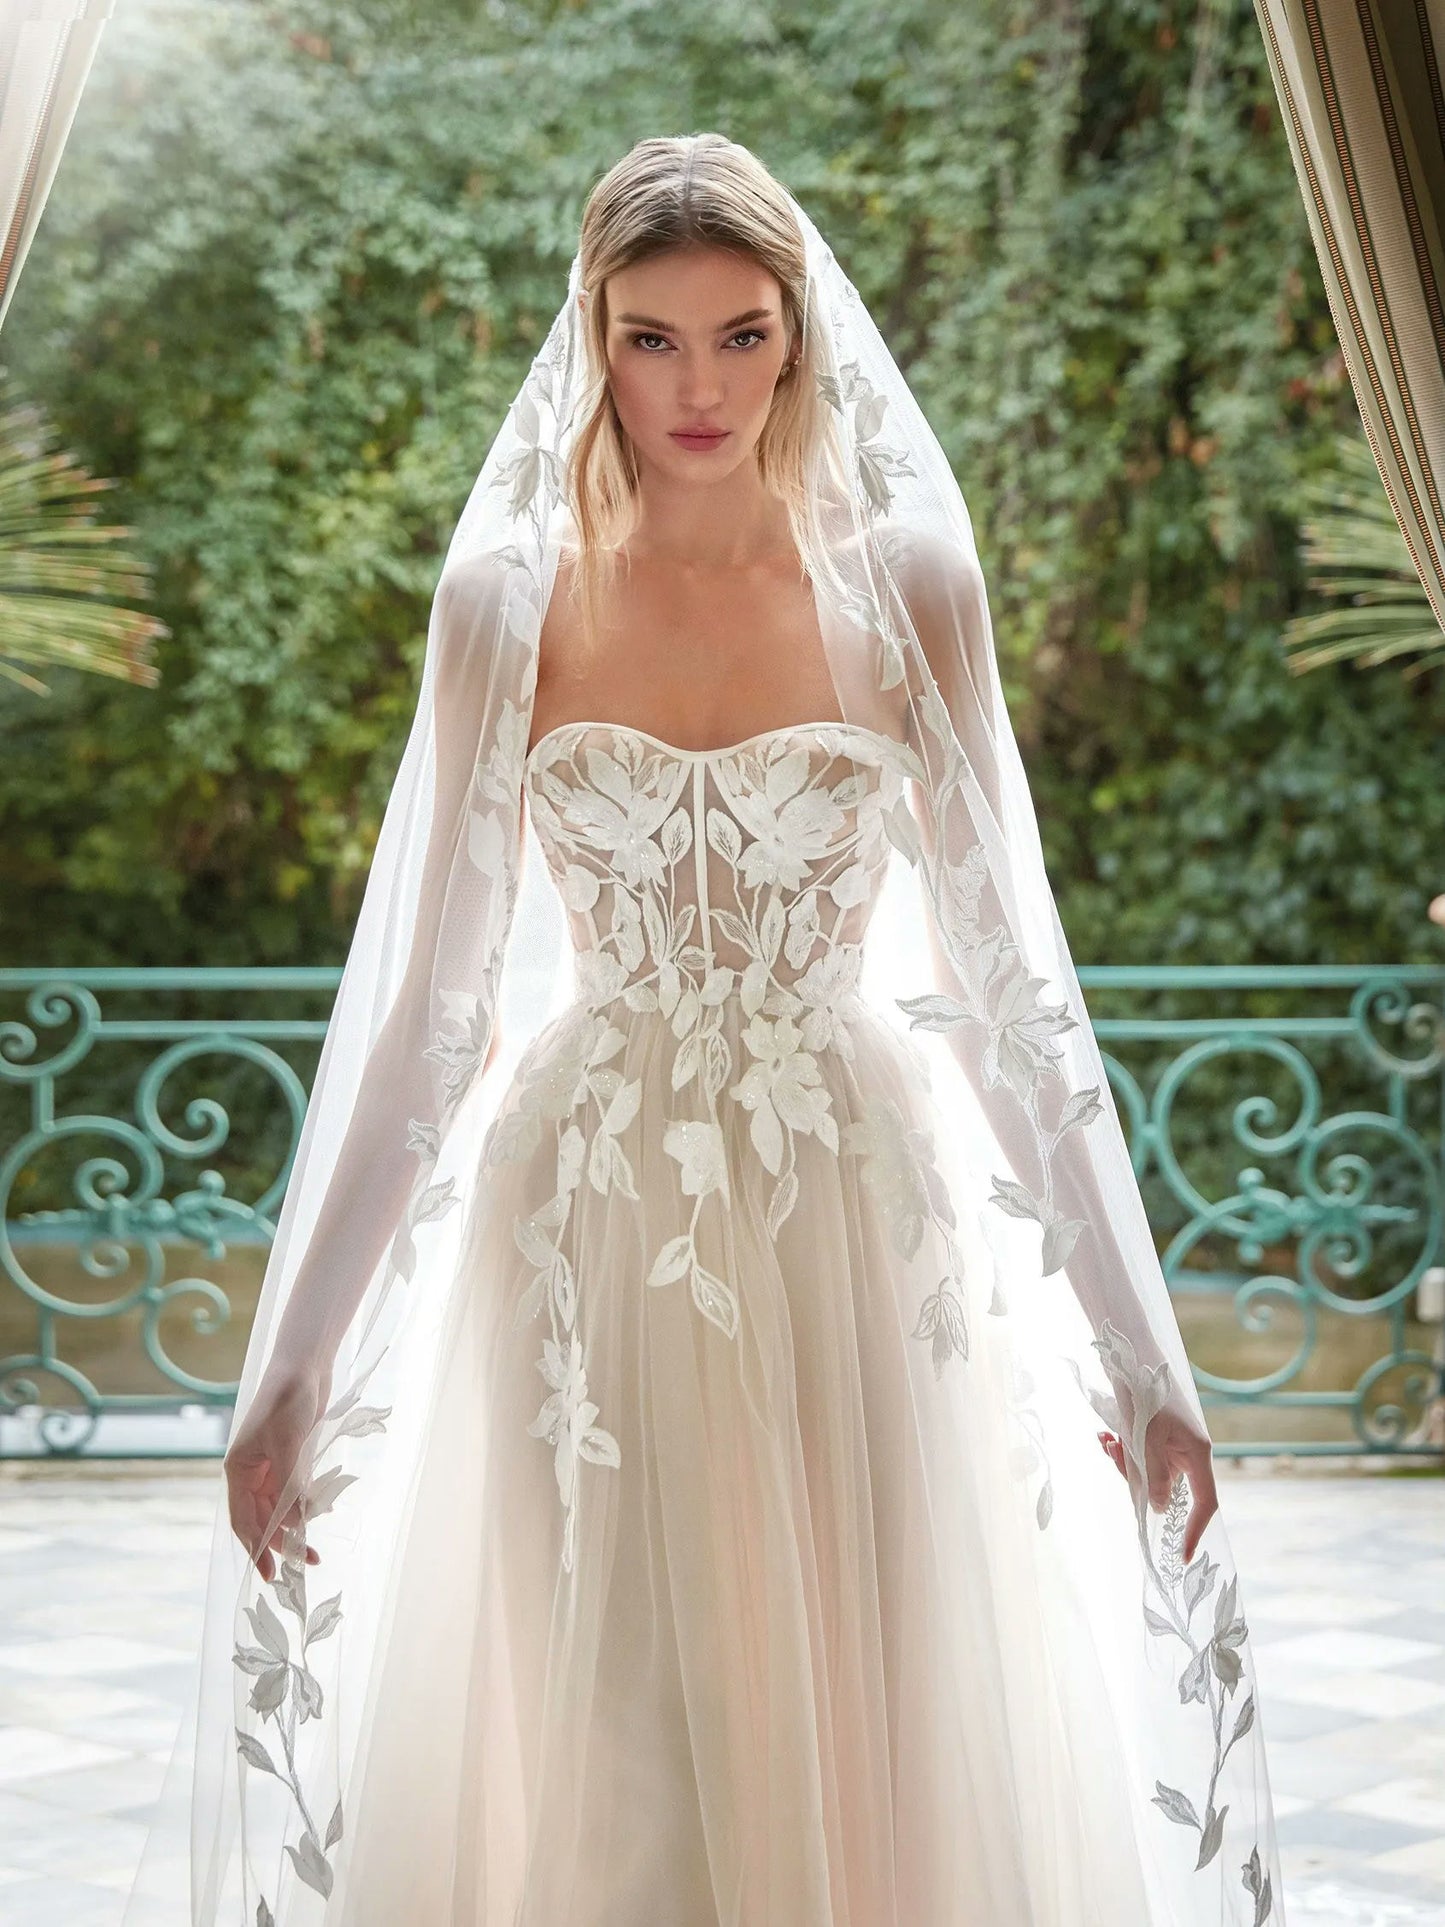 This stunning neckline boasts femininity and will be sure to turn heads on your special day